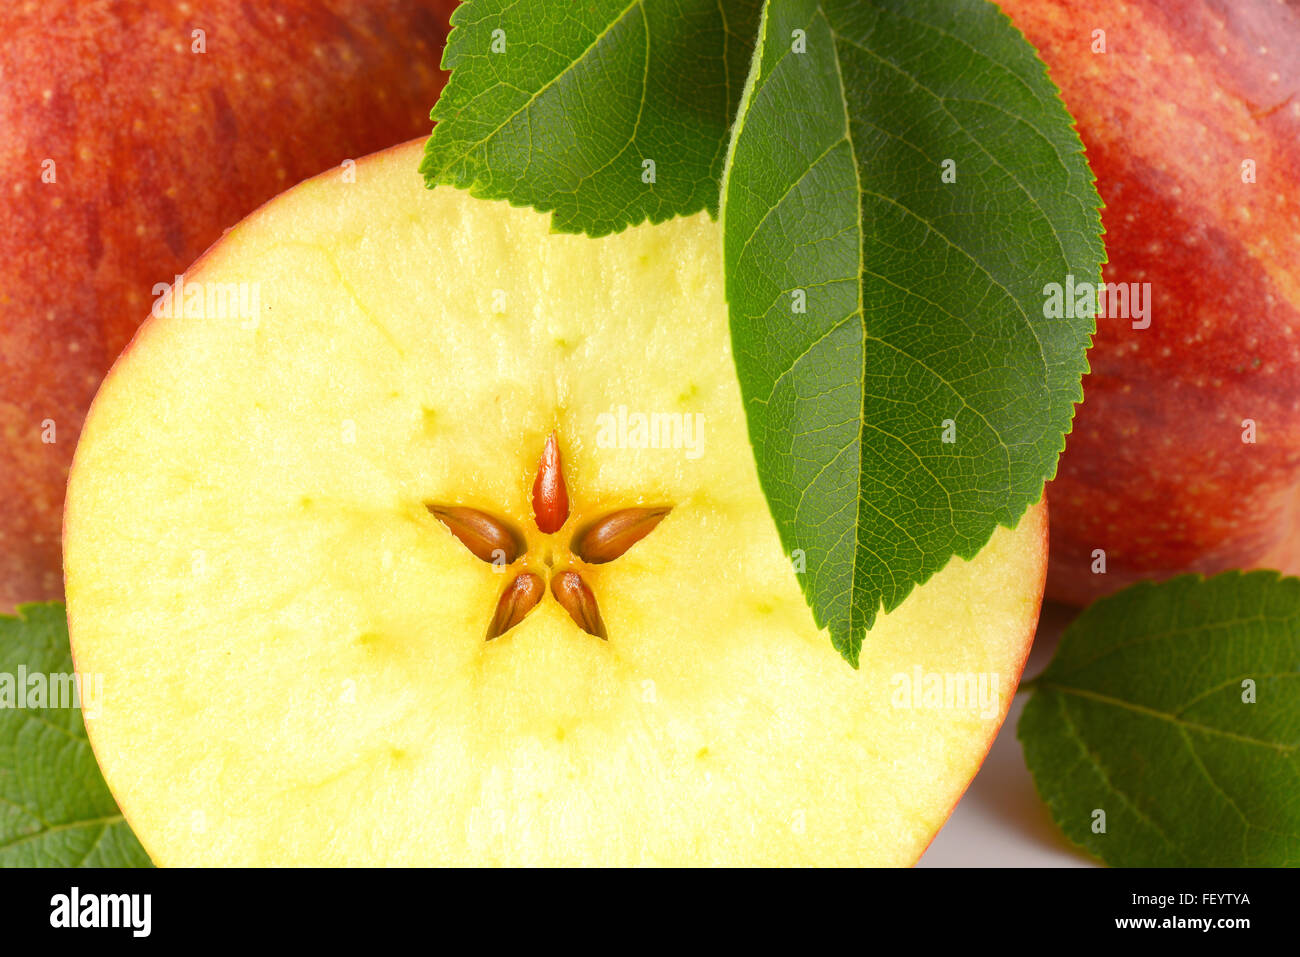 detail of half an apple with leaves Stock Photo